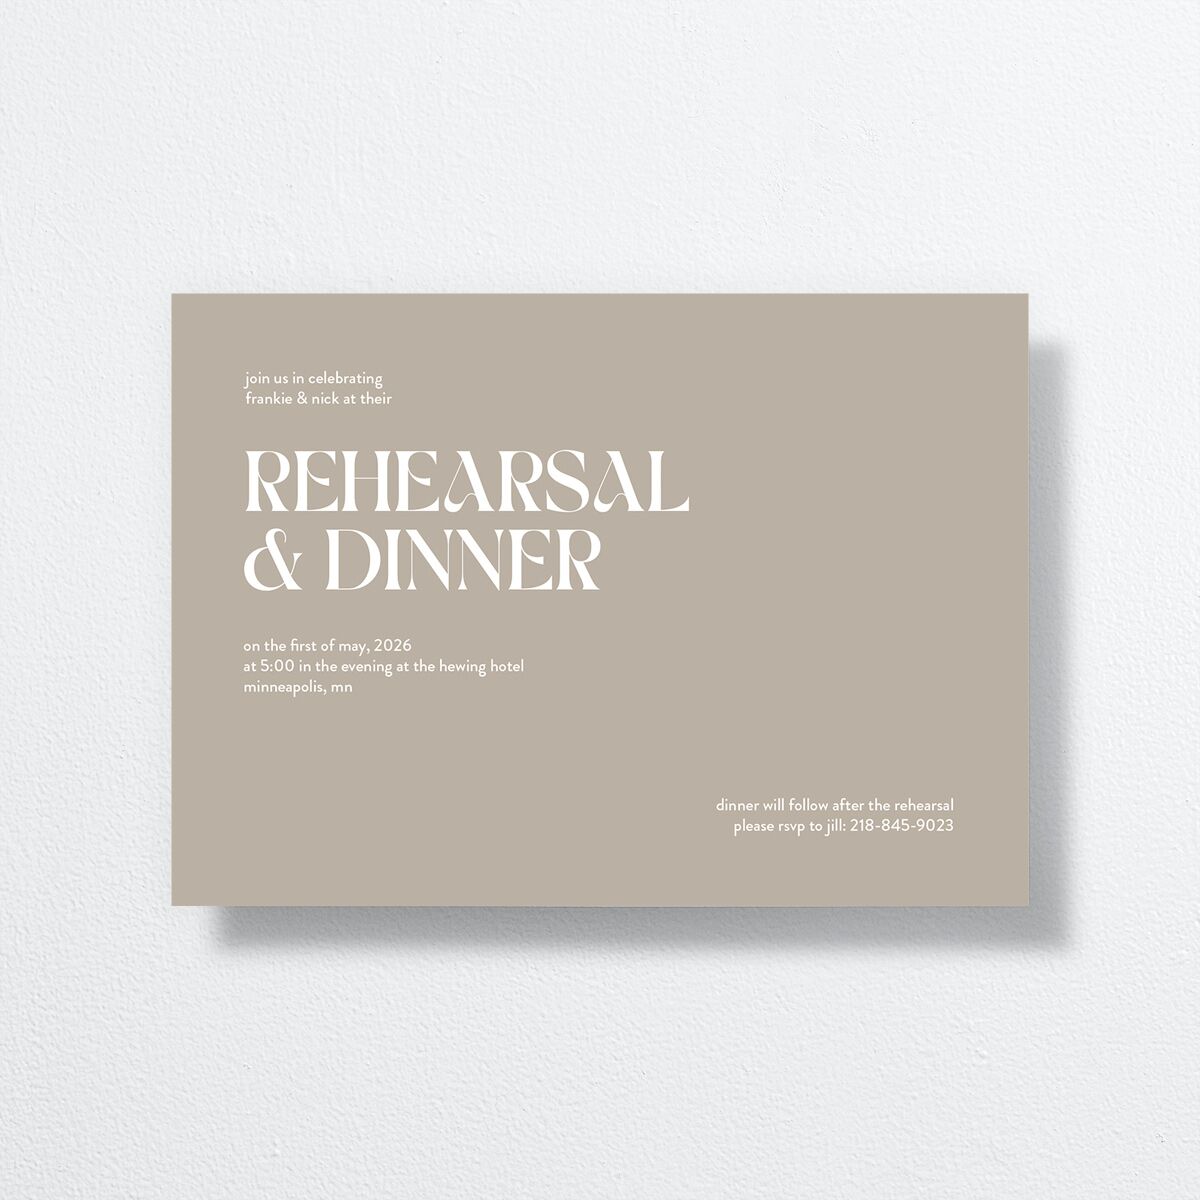 Checked Rehearsal Dinner Invitations front